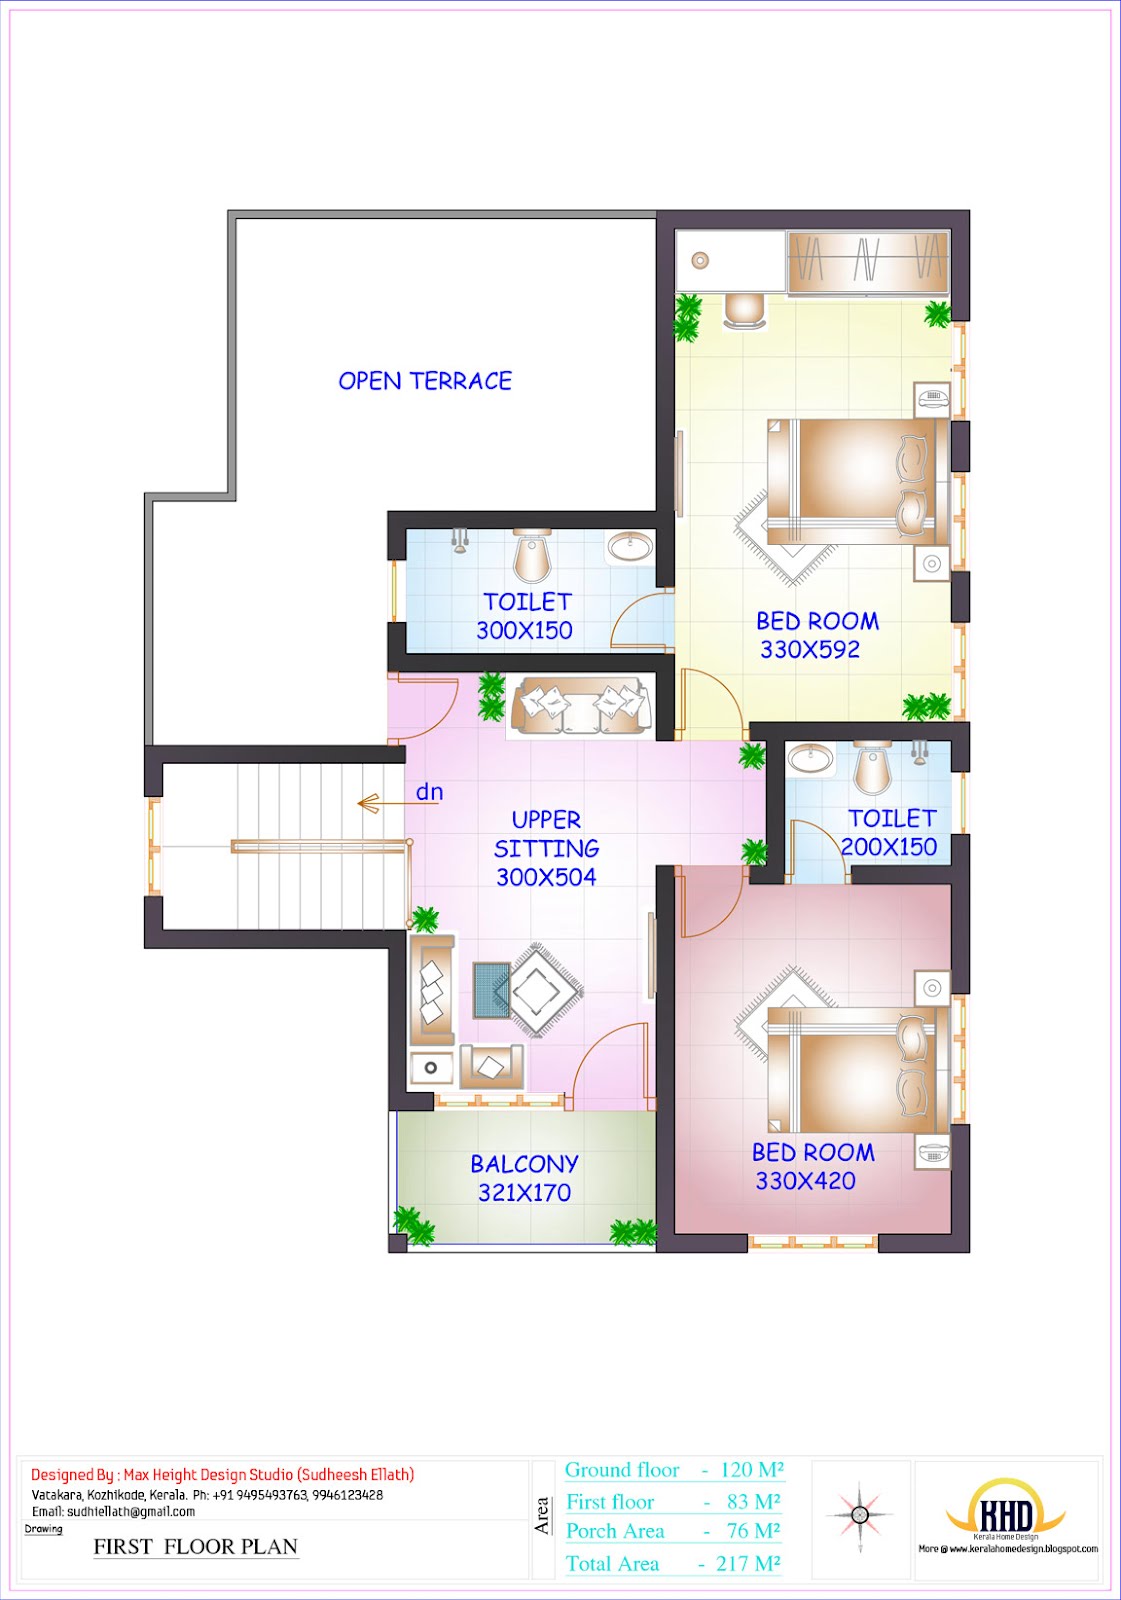  of 2336 sq.feet, 4 bedroom house - Kerala home design and floor plans